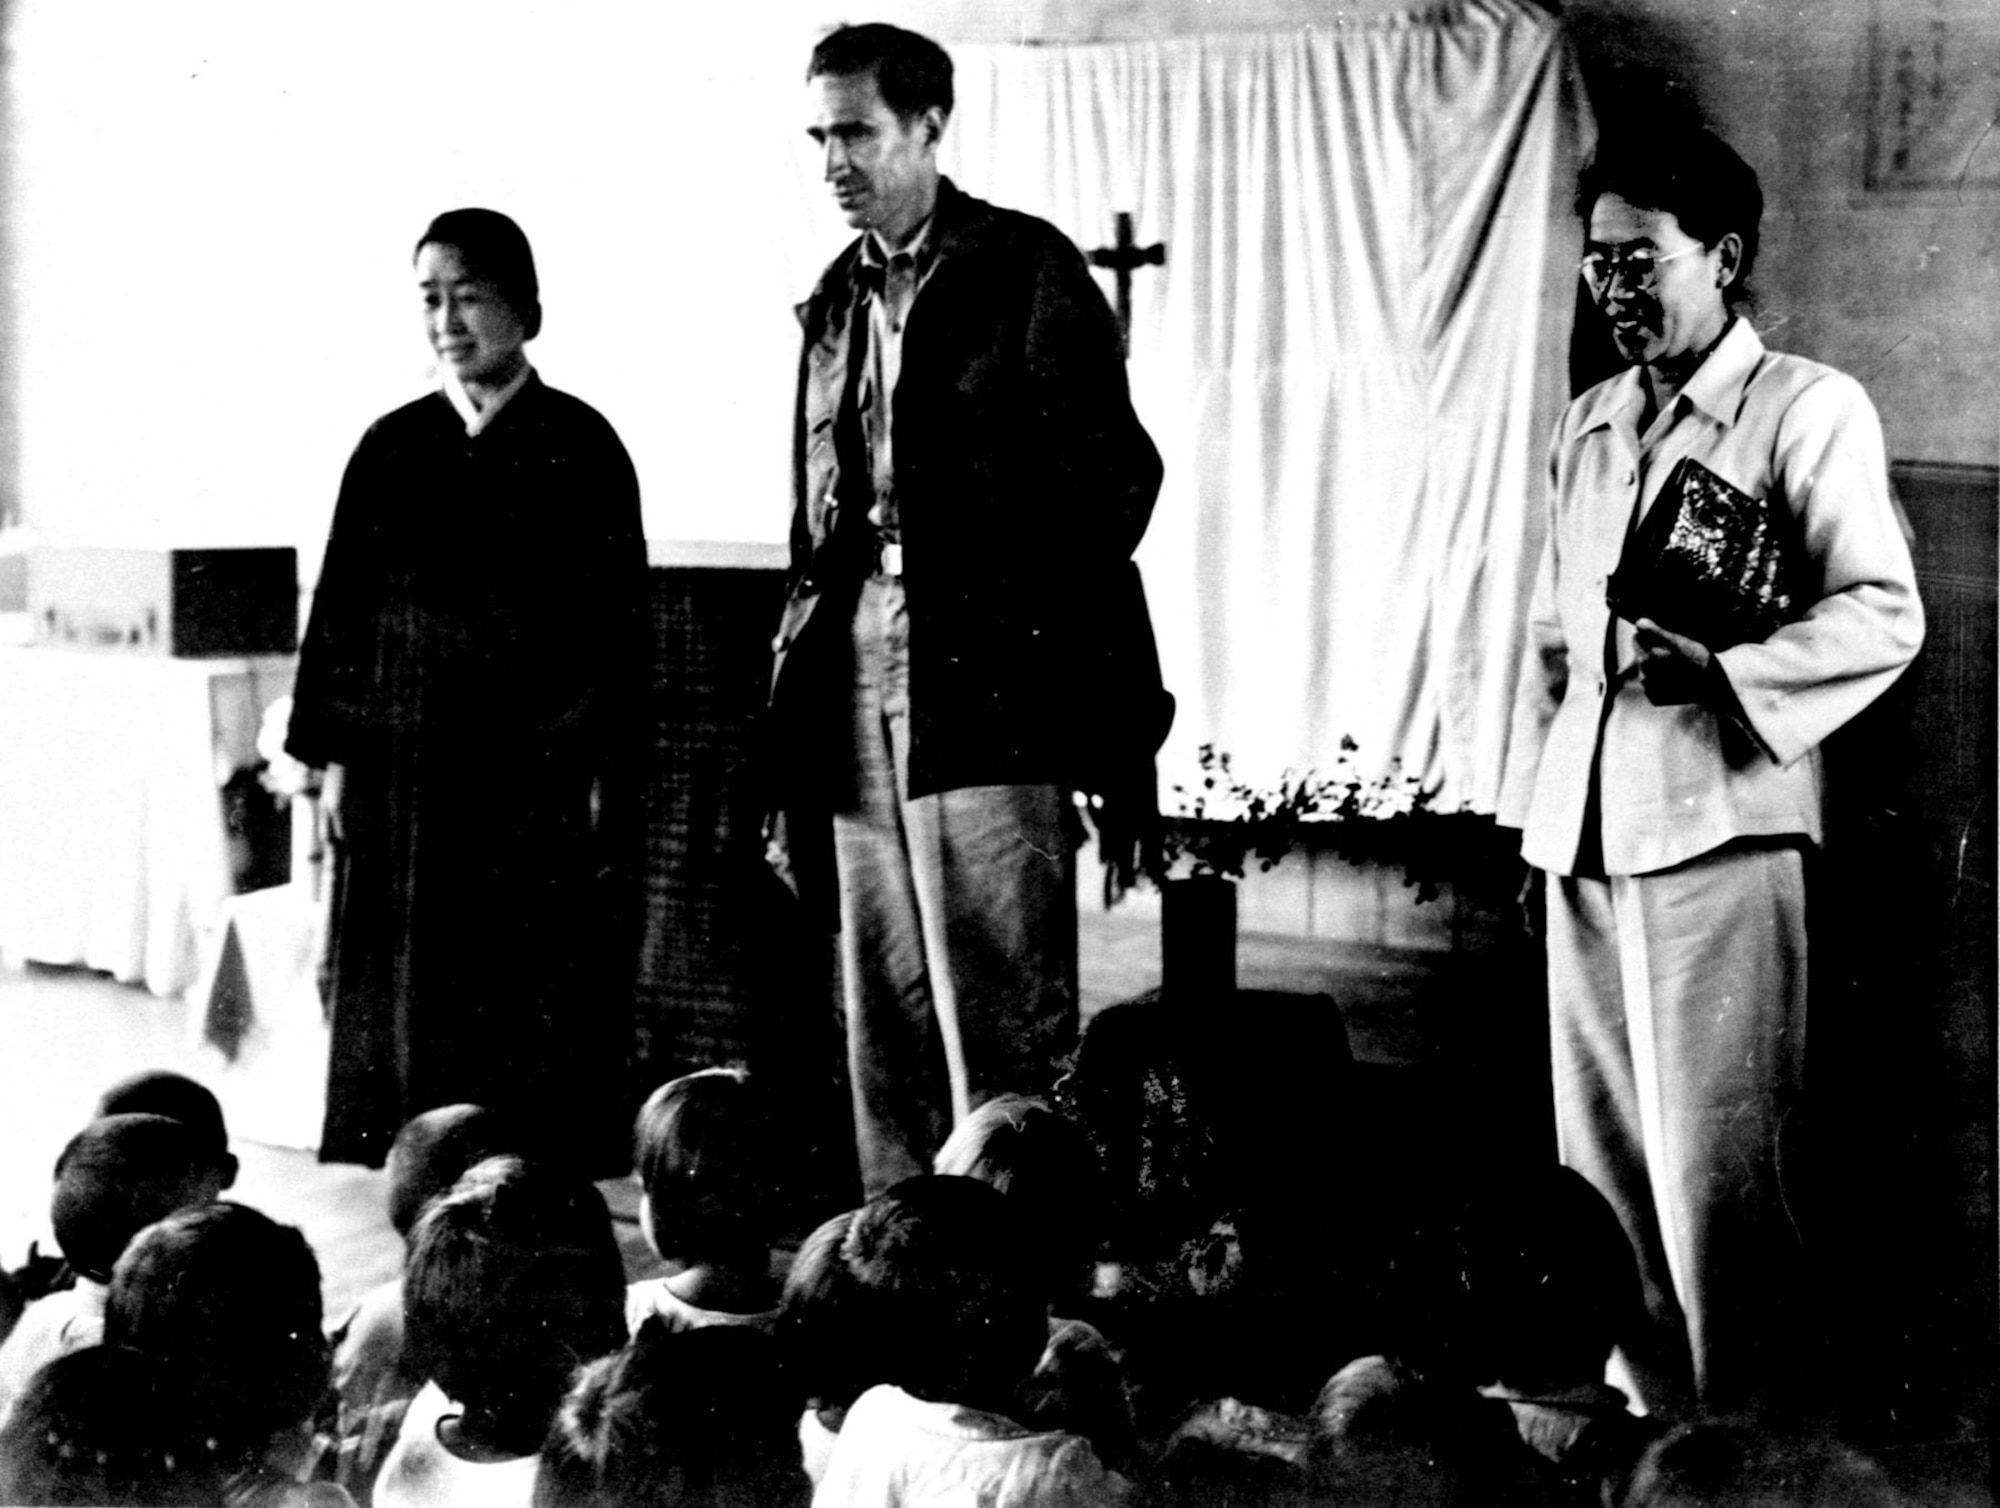 Lt .Col. Dean Hess bids “good-bye” on his last visit to the Cheju-do orphanage before his transfer to the U.S. in May 1951. (U.S. Air Force photo)